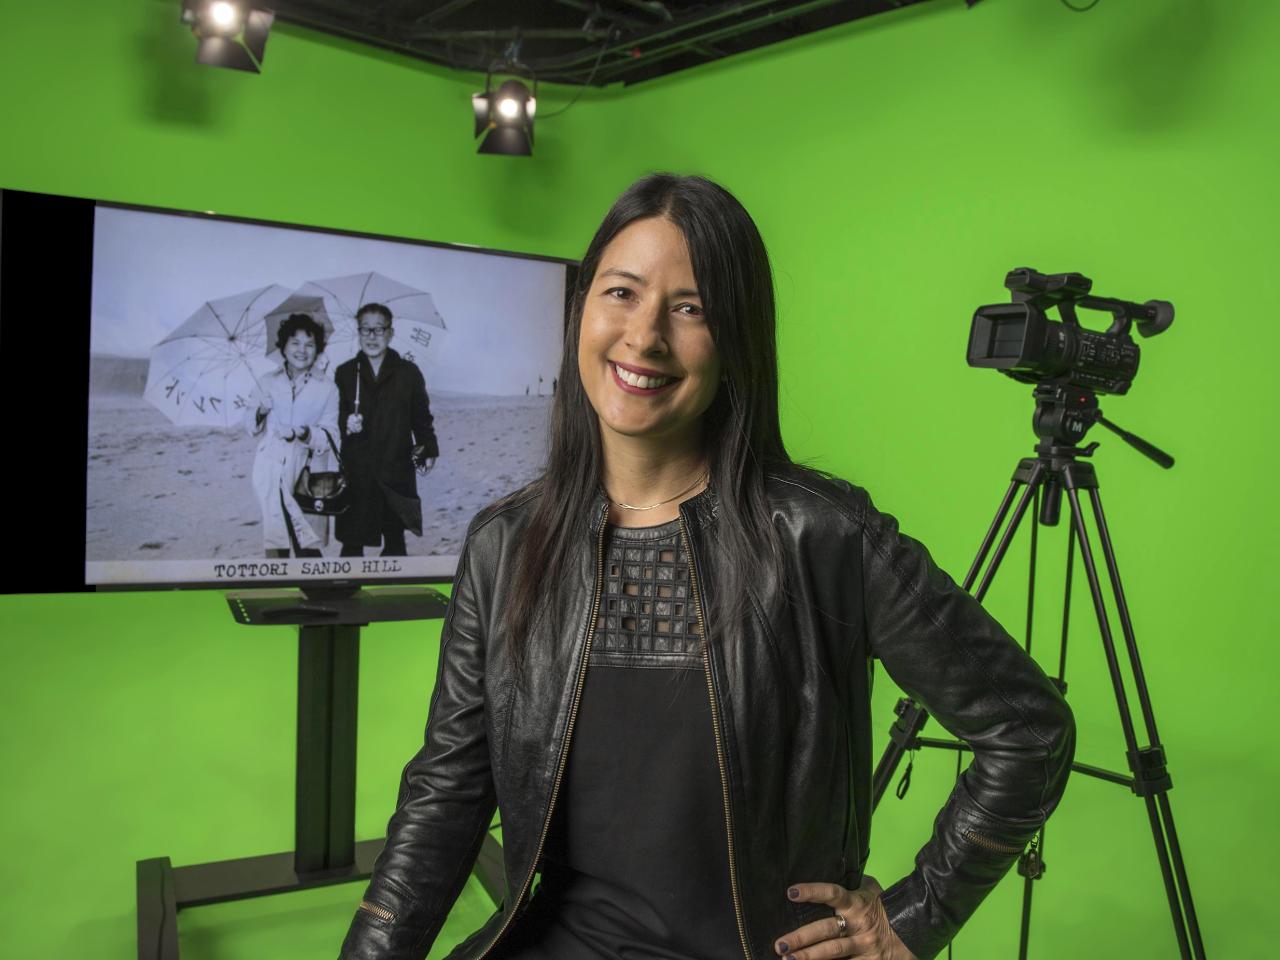 Kimi Takesue smiles for the camera in a studio with green-screen walls. Behind her, a video camera on a tripod and a monitor showing a black and white image of her grandparents on the beach with parasols.